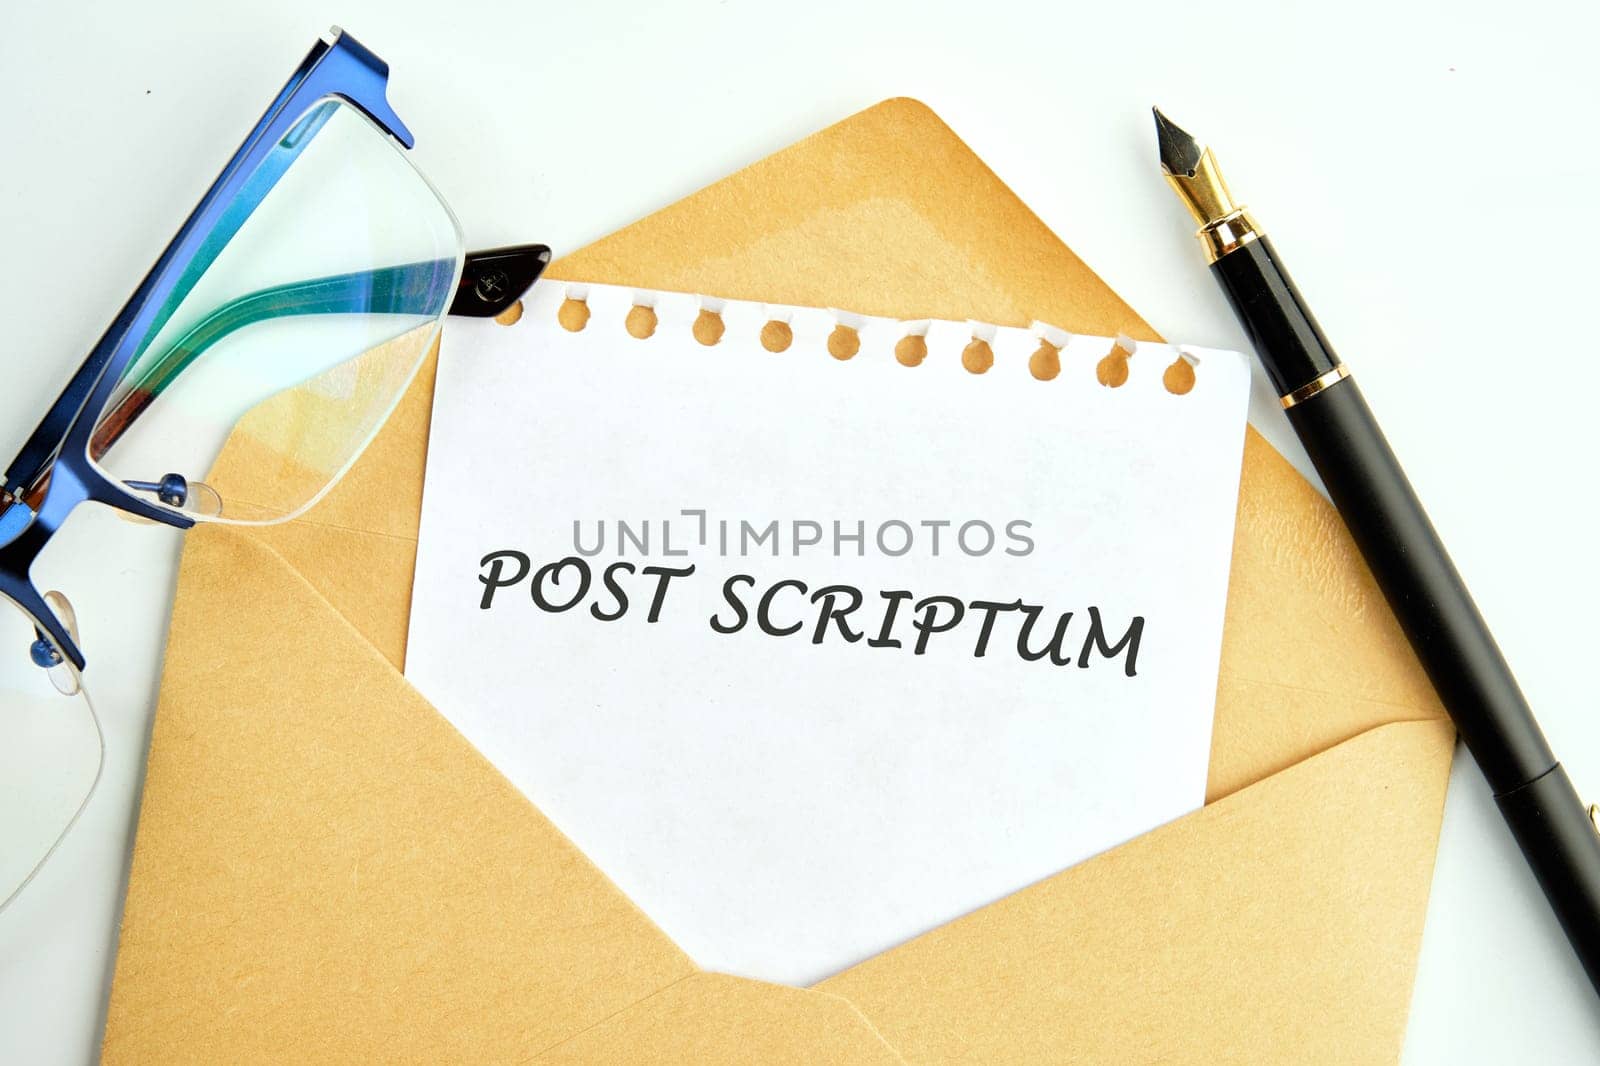 POST SCRIPTUM ancient Latin saying meaning - afterthought, afterwards text on a sheet in an envelope